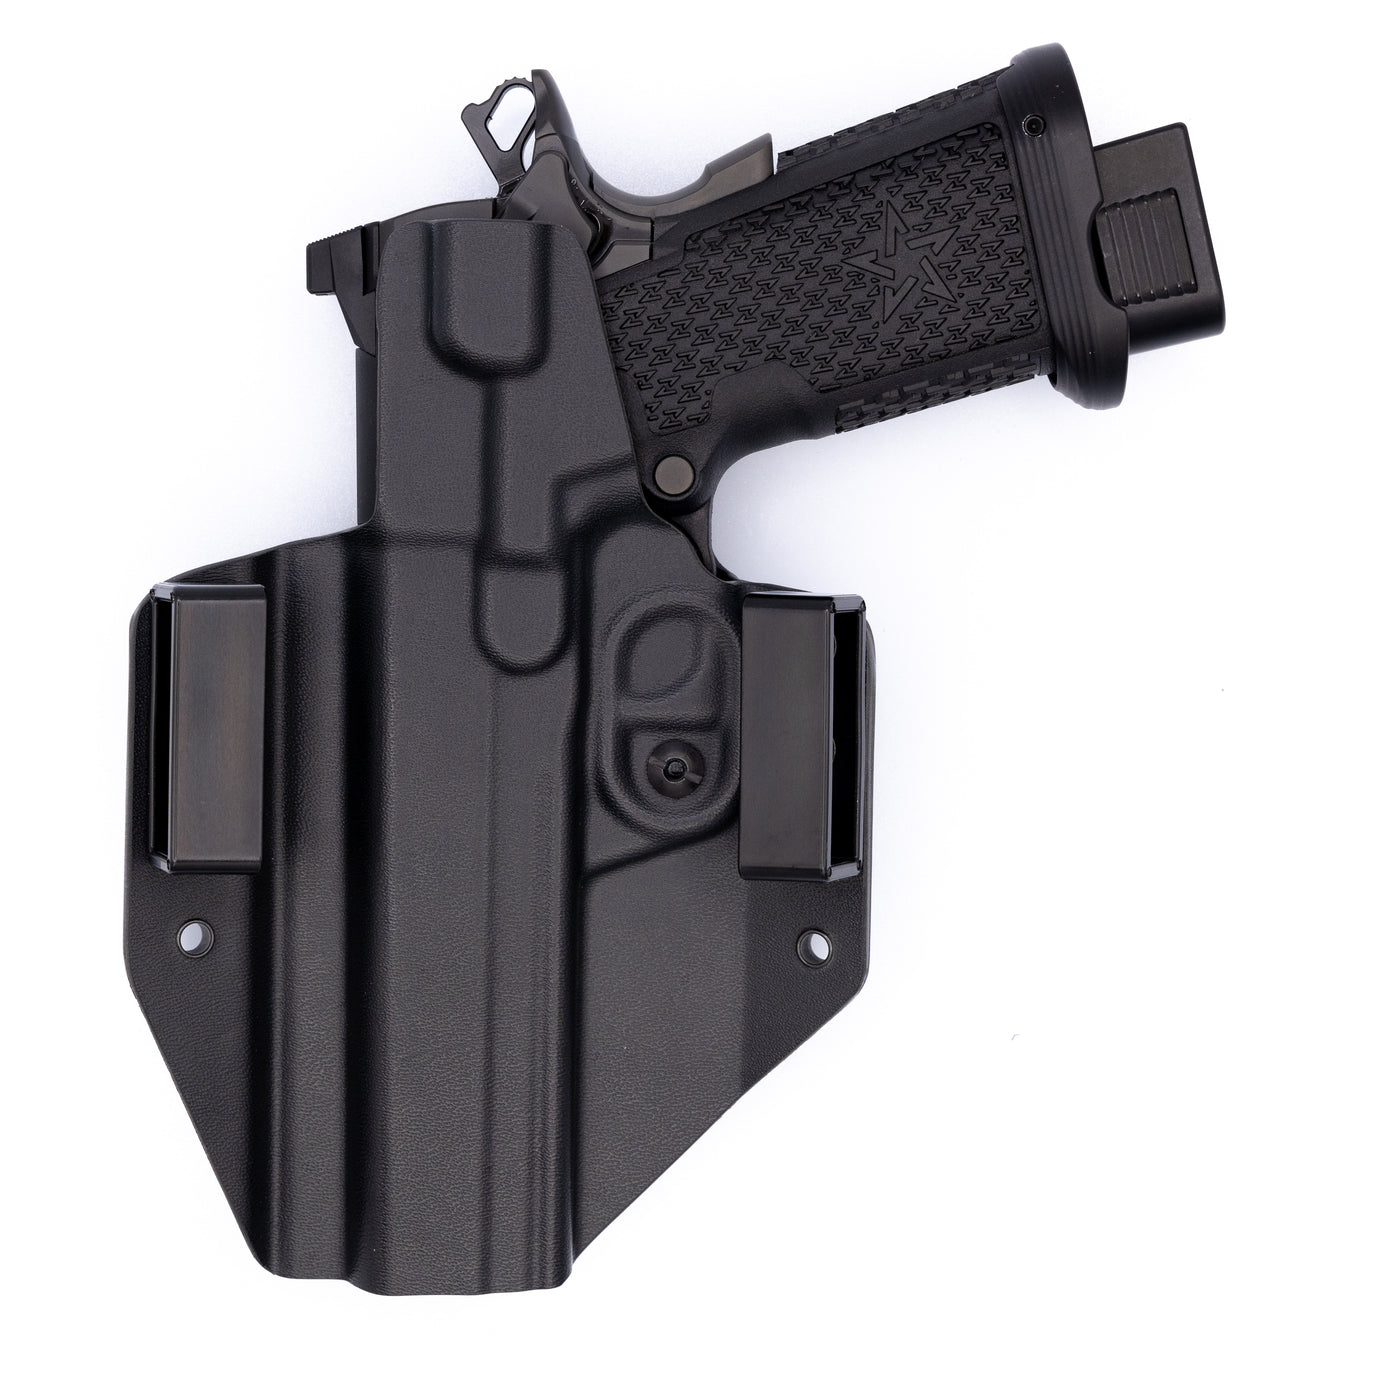 C&G Holsters OWB Covert adjustable retention holster for Staccato XC.